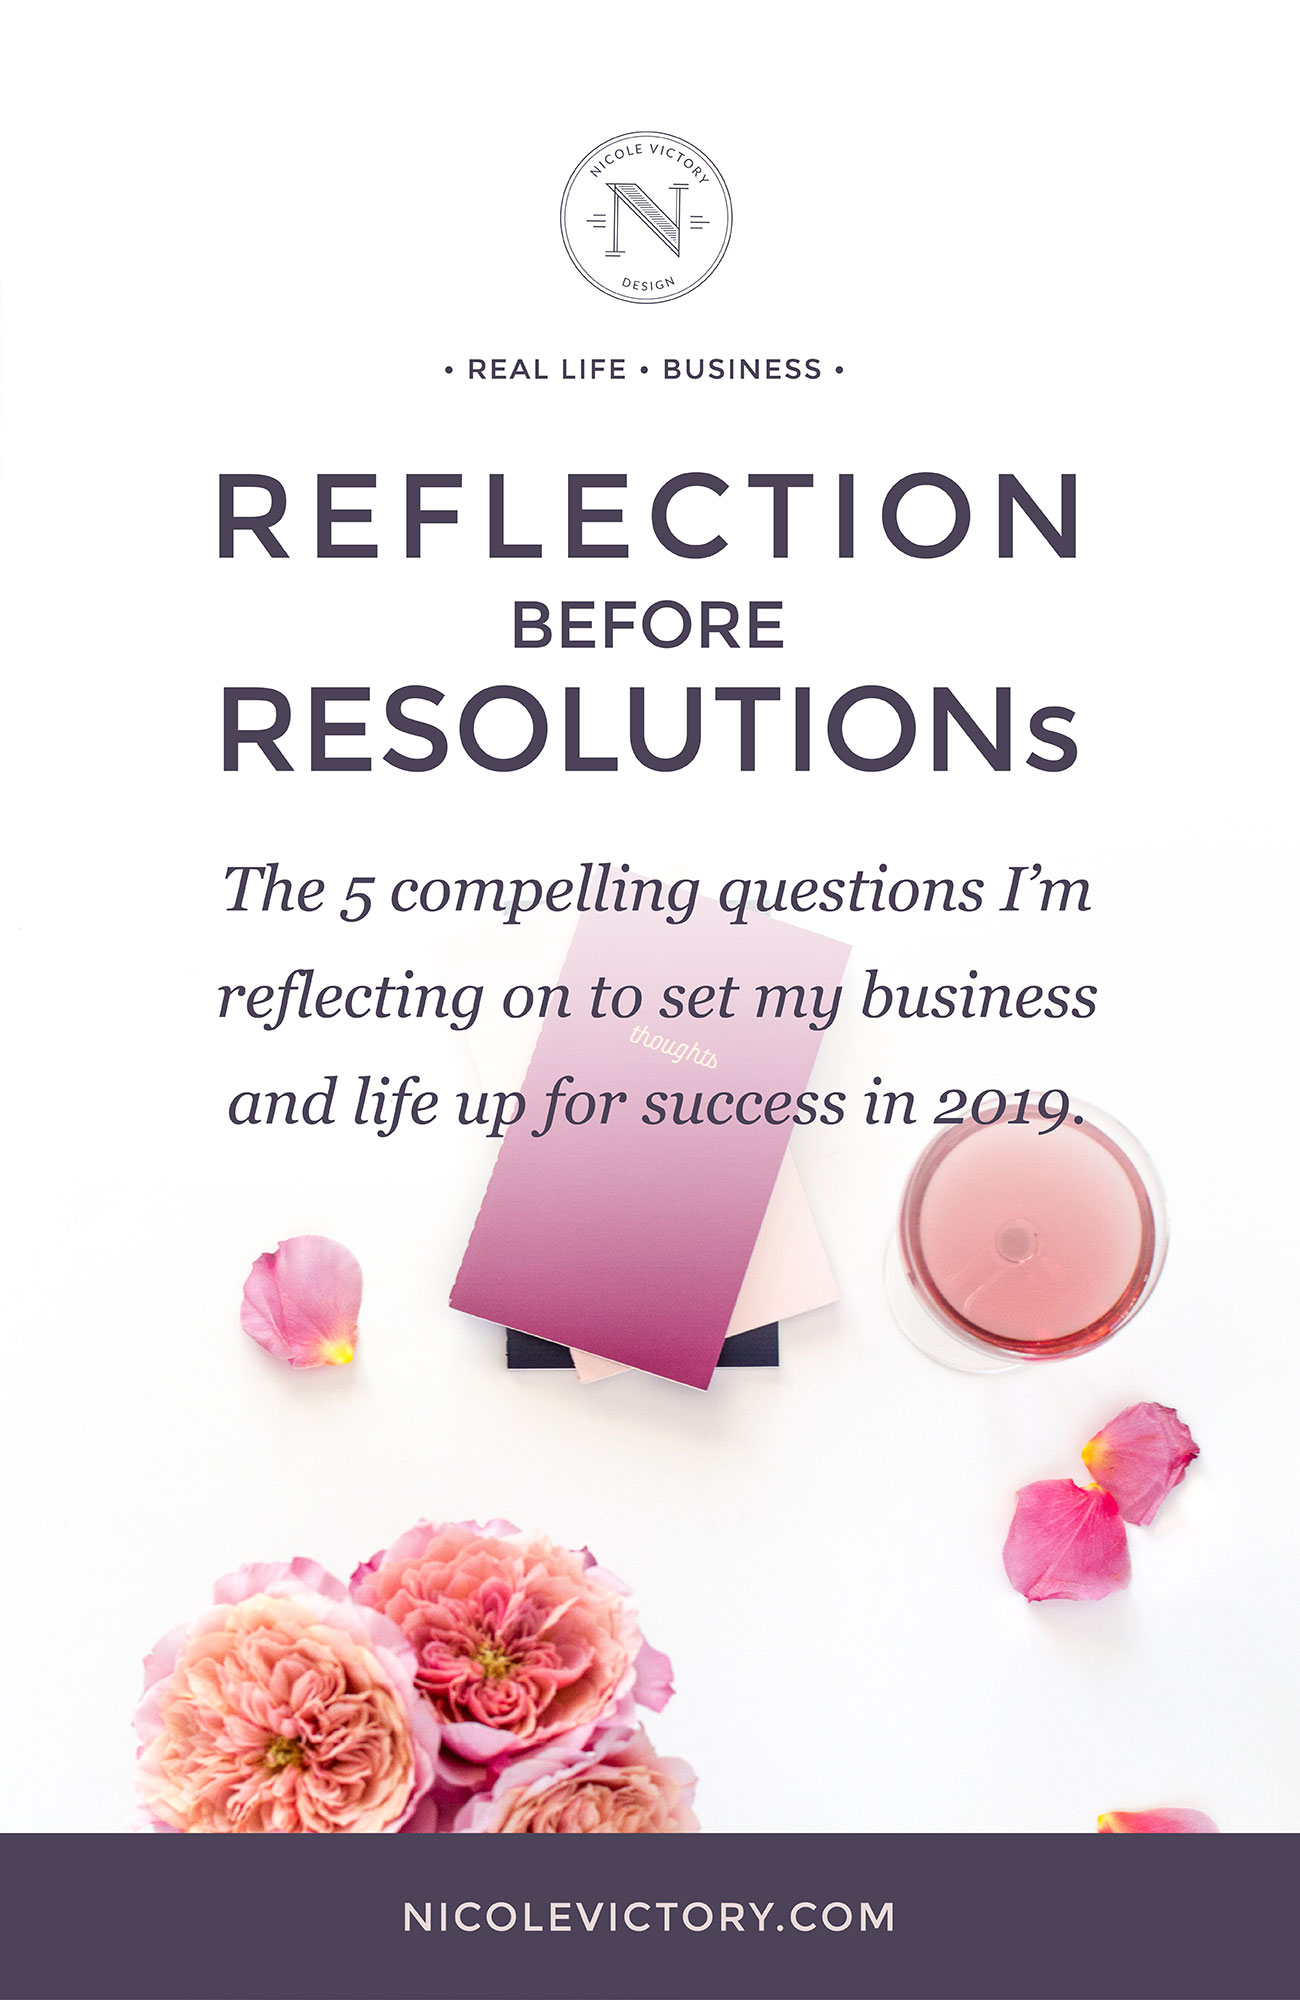 Reflection Before Resolutions 2019 | 5 compelling questions I'm reflecting on to set my business up for success in the New Year | Nicole Victory Design